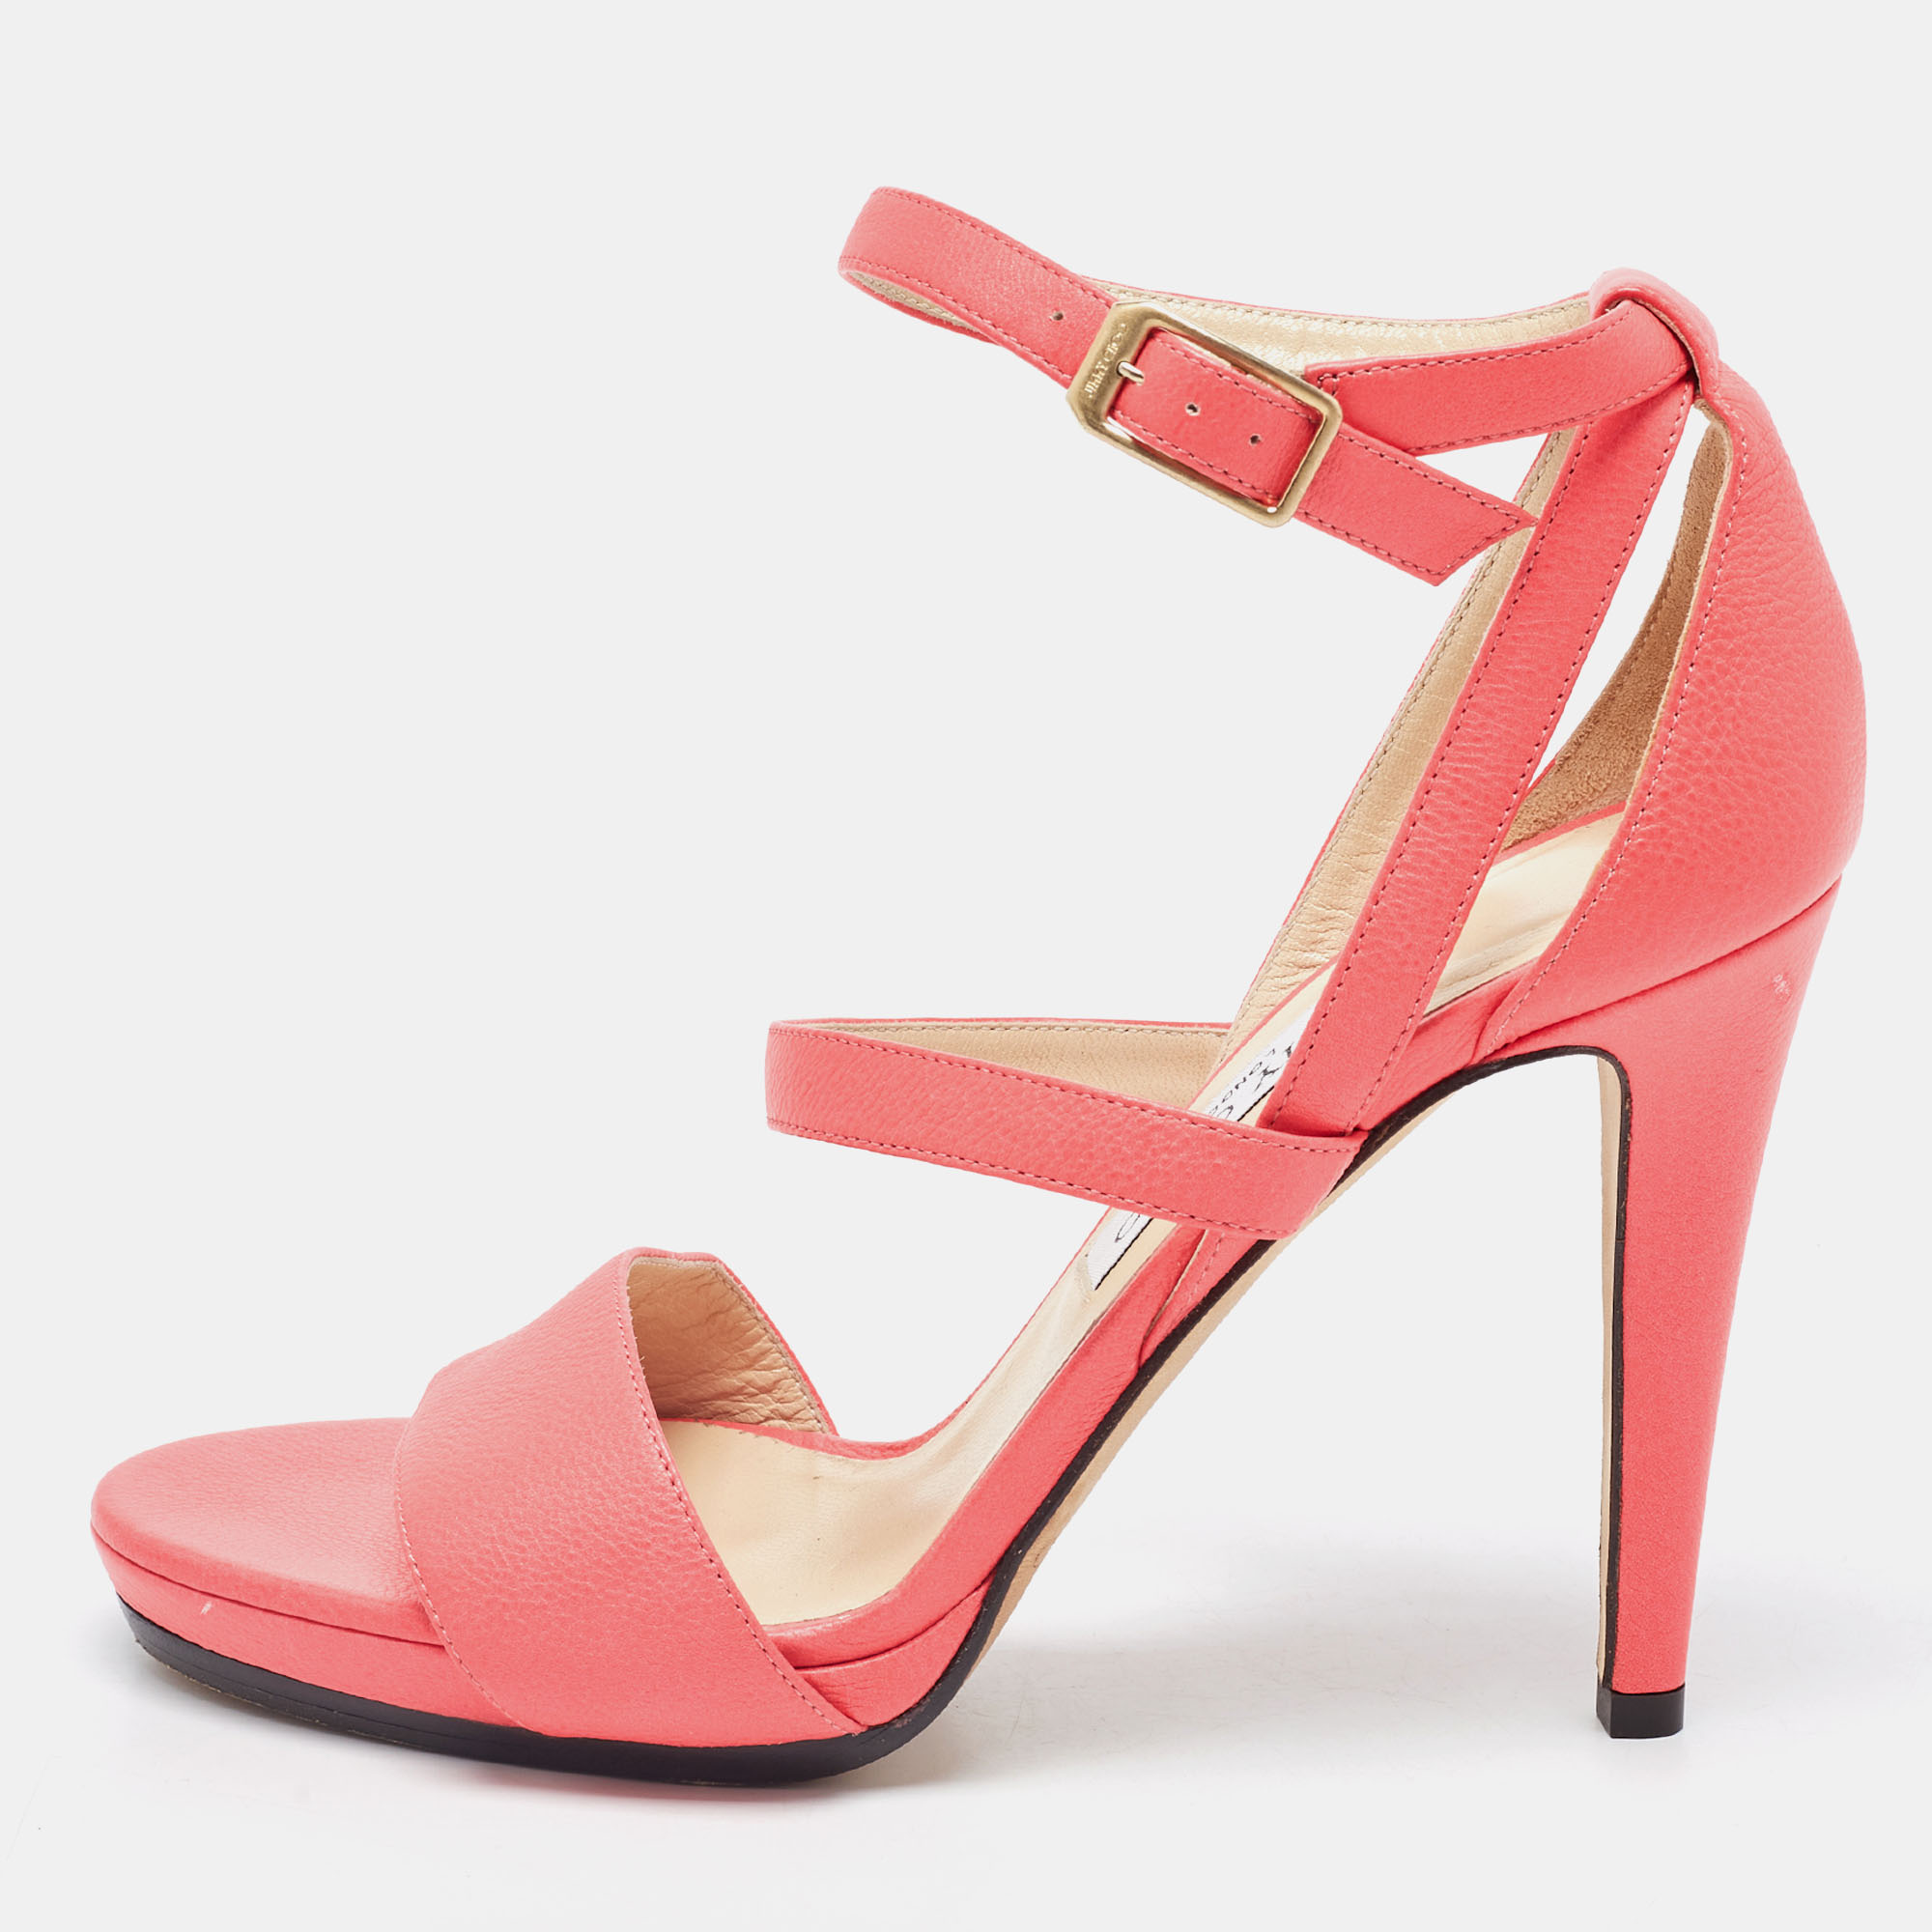 Jimmy Choo Neon Pink Leather Strappy Sandals Size 39